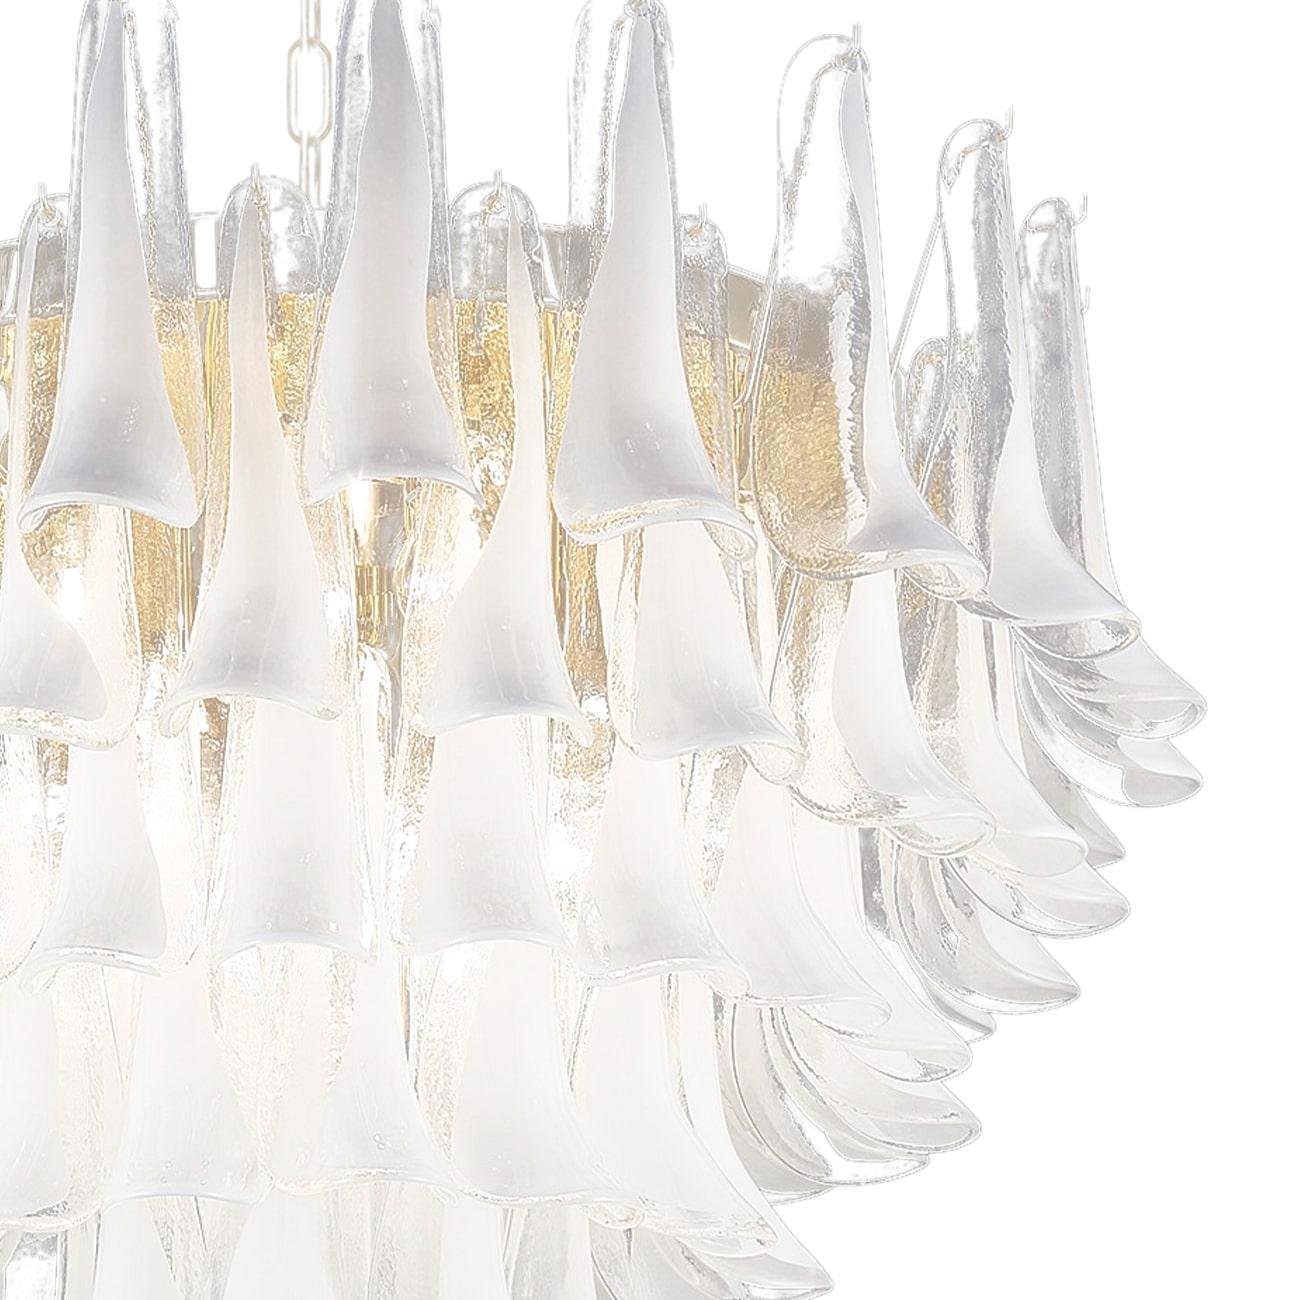 901 by La murrina : Artistic Handmade Modular Murano glass chandelier.
The particular design plays on the repetition of glass elements capable to create elegant and sophisticated lighting. 
The modular structure allows to combine models with